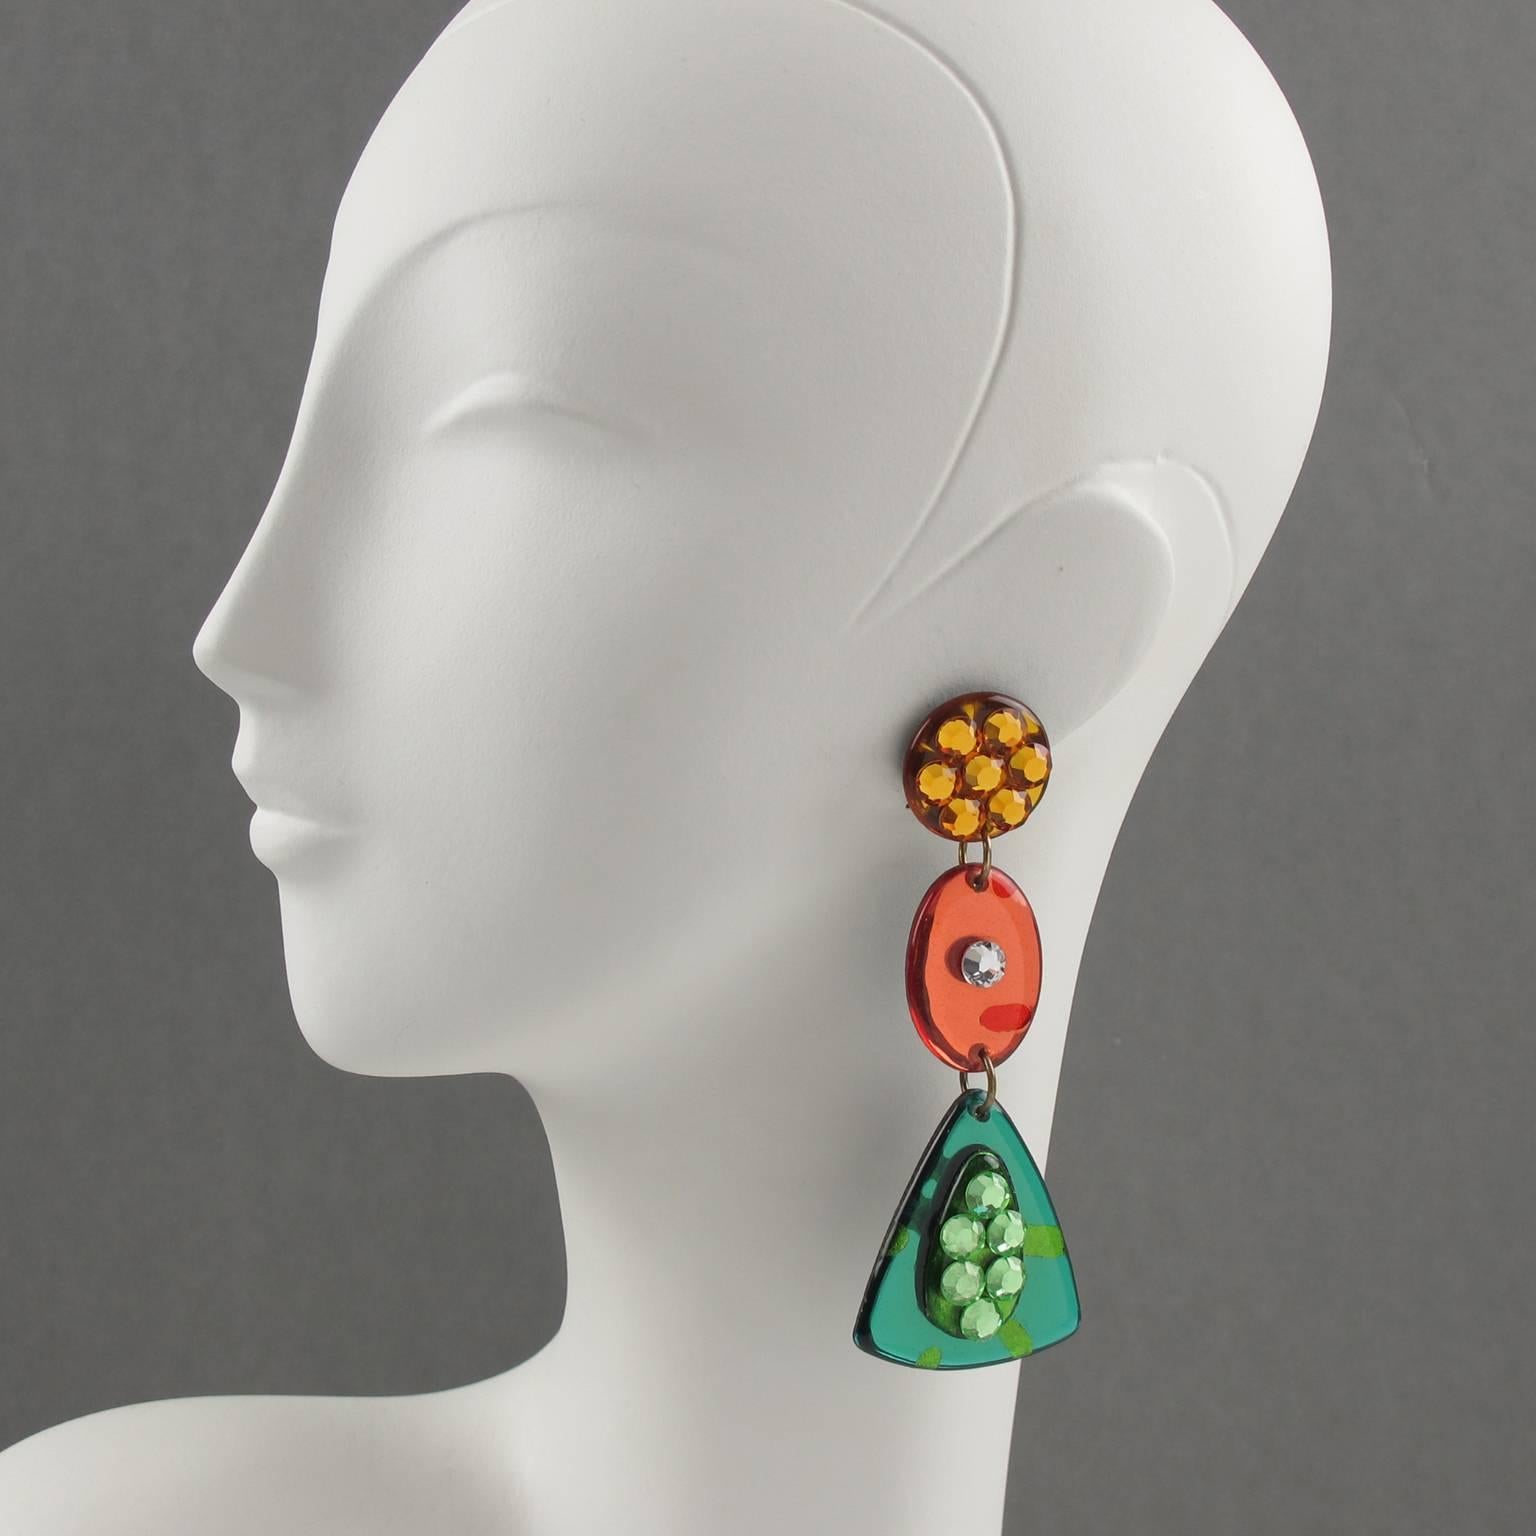 Very cool Italian designer studio Lucite or Resin dangling clip on earrings. Oversized chandelier shape with geometric carved design in amber, neon orange and green colors with mirror effect and textured pattern. Earrings are also ornate with clear,